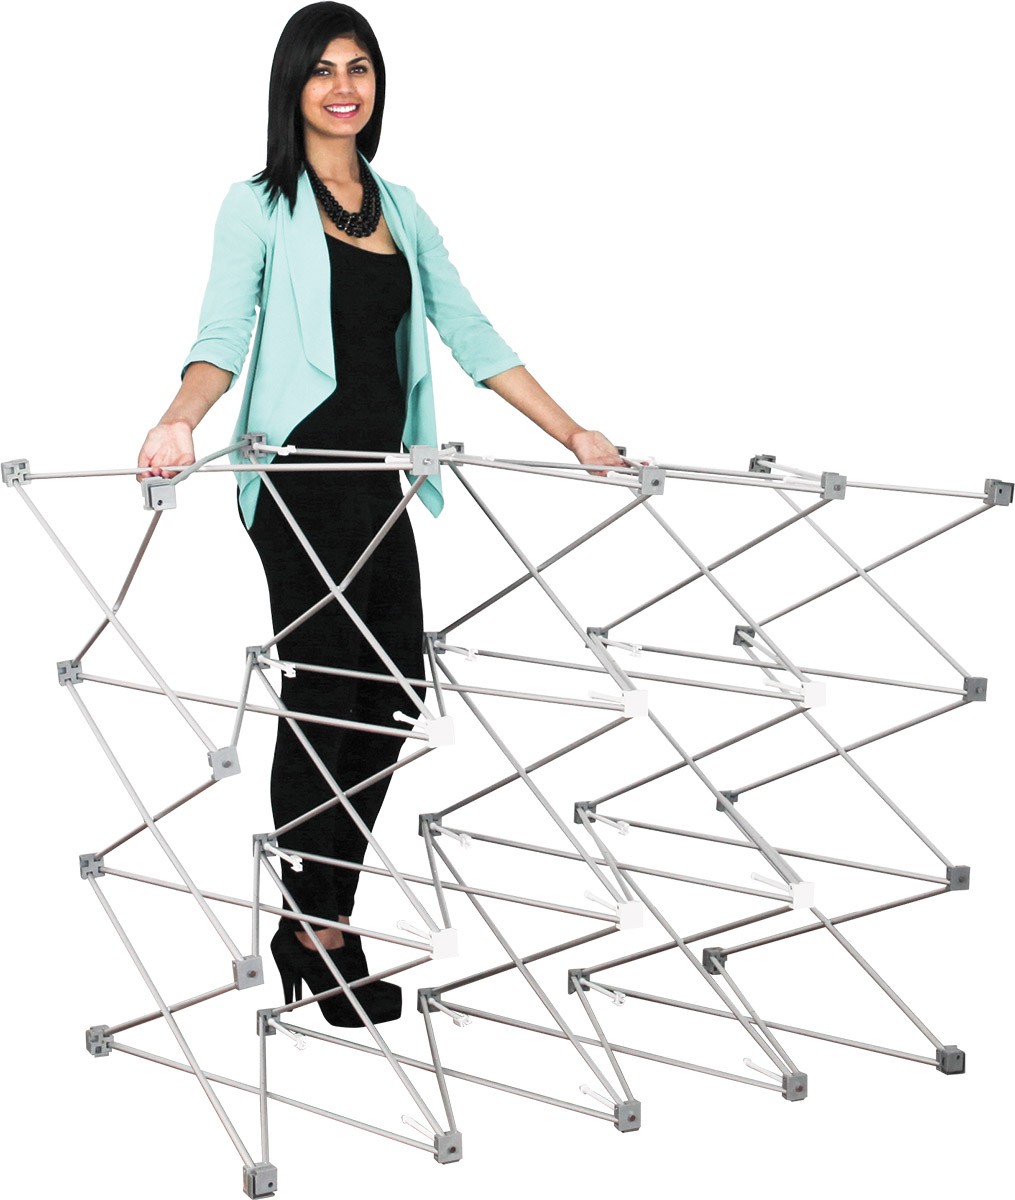 Embrace 10' Extra Tall Tension Fabric Display